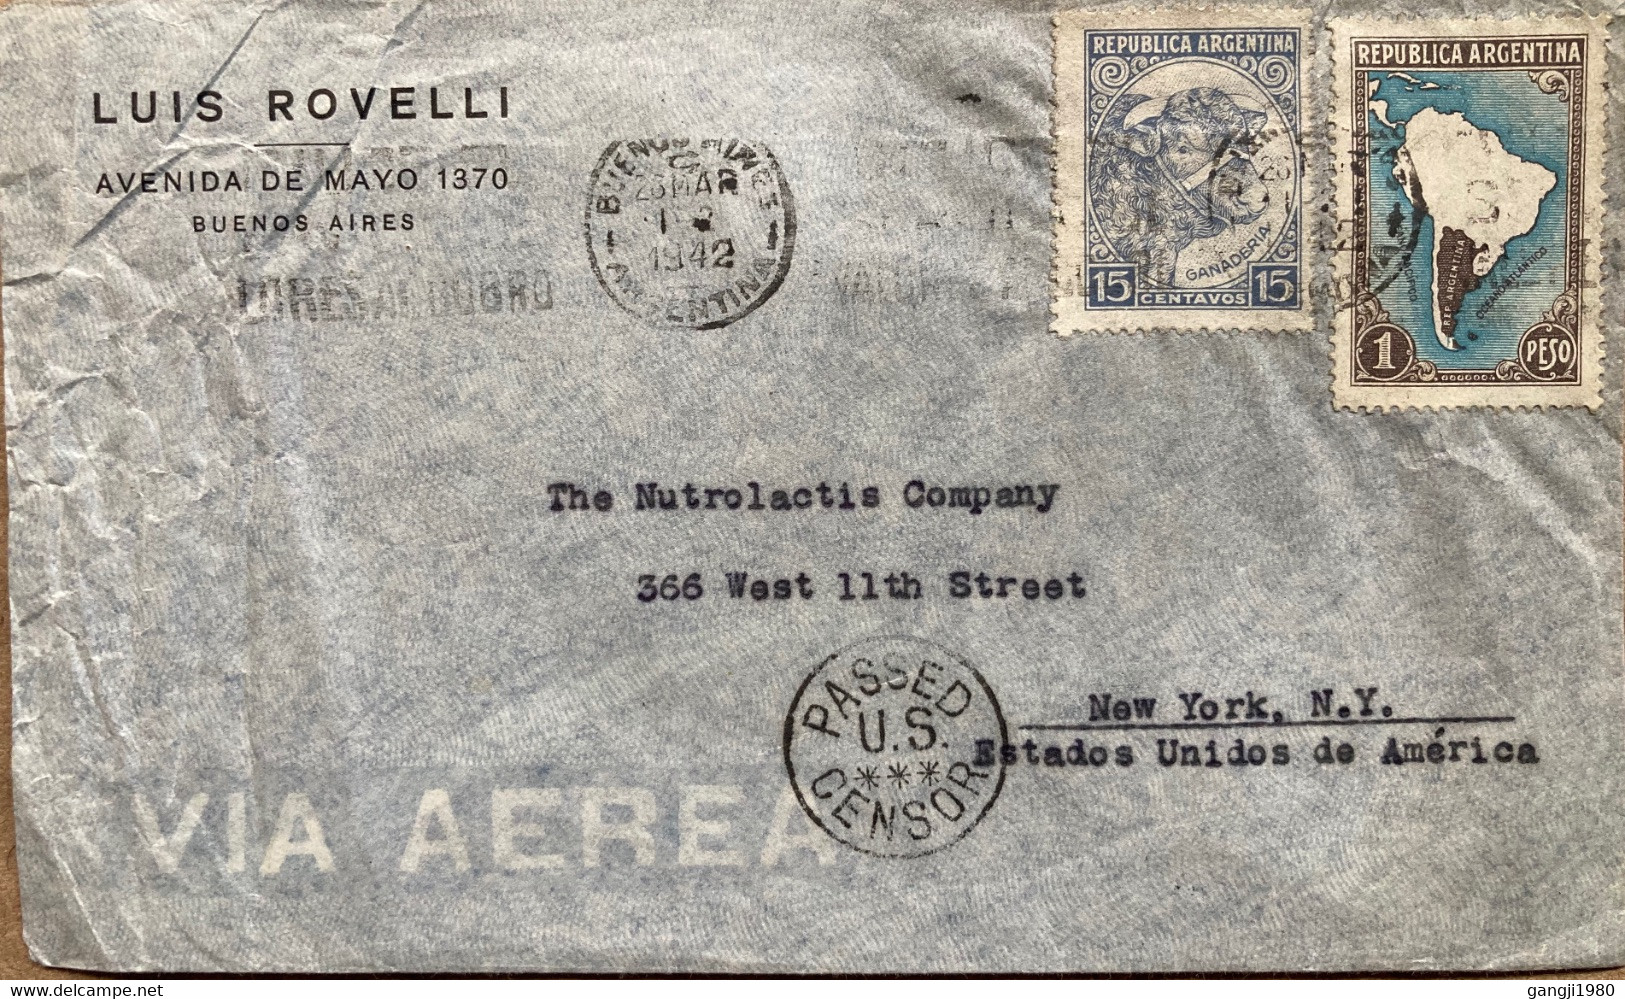 ARGENTINA-1942, WORLD WAR-2, COVER USED TO USA,PASSED US CENSOR CANCEL, PRIVATE COVER, LUIS ROVELLI, MAP, BUFFALO STAMP. - Cartas & Documentos